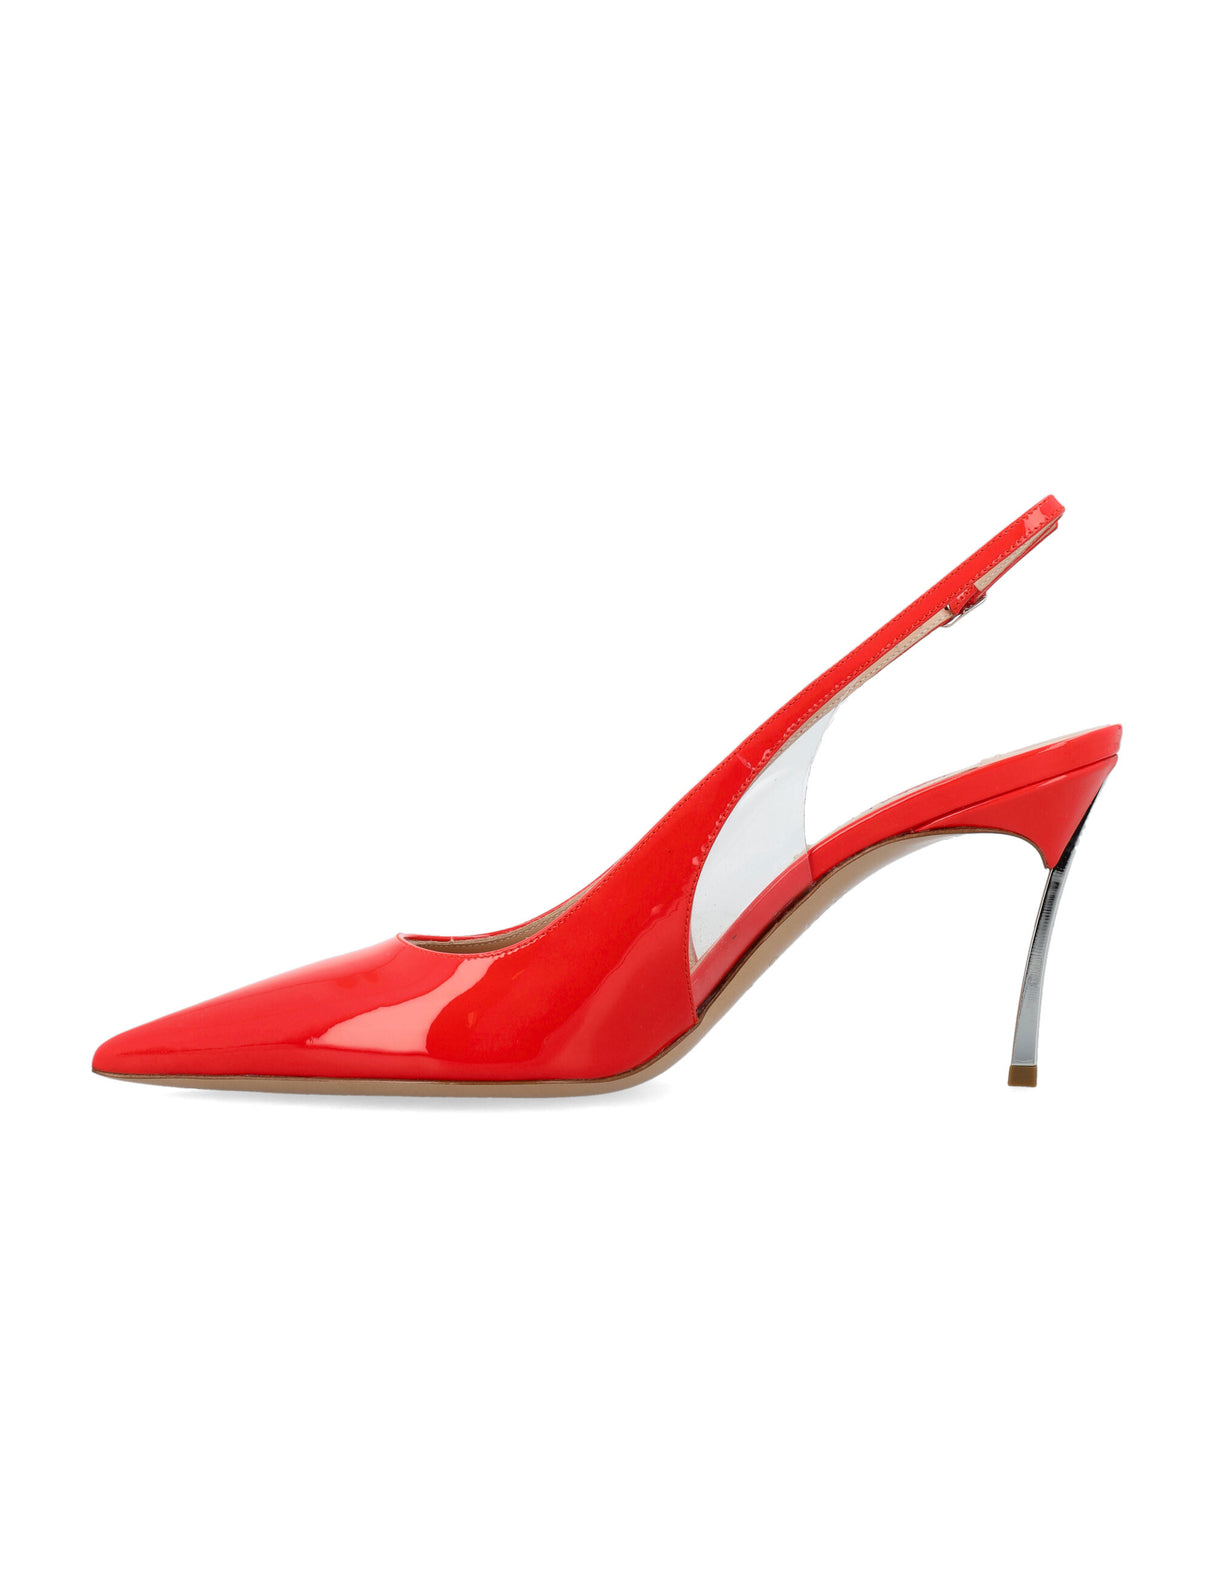 Coral Patent Leather Slingback Pumps for Women - High Heel Stiletto by CASADEI